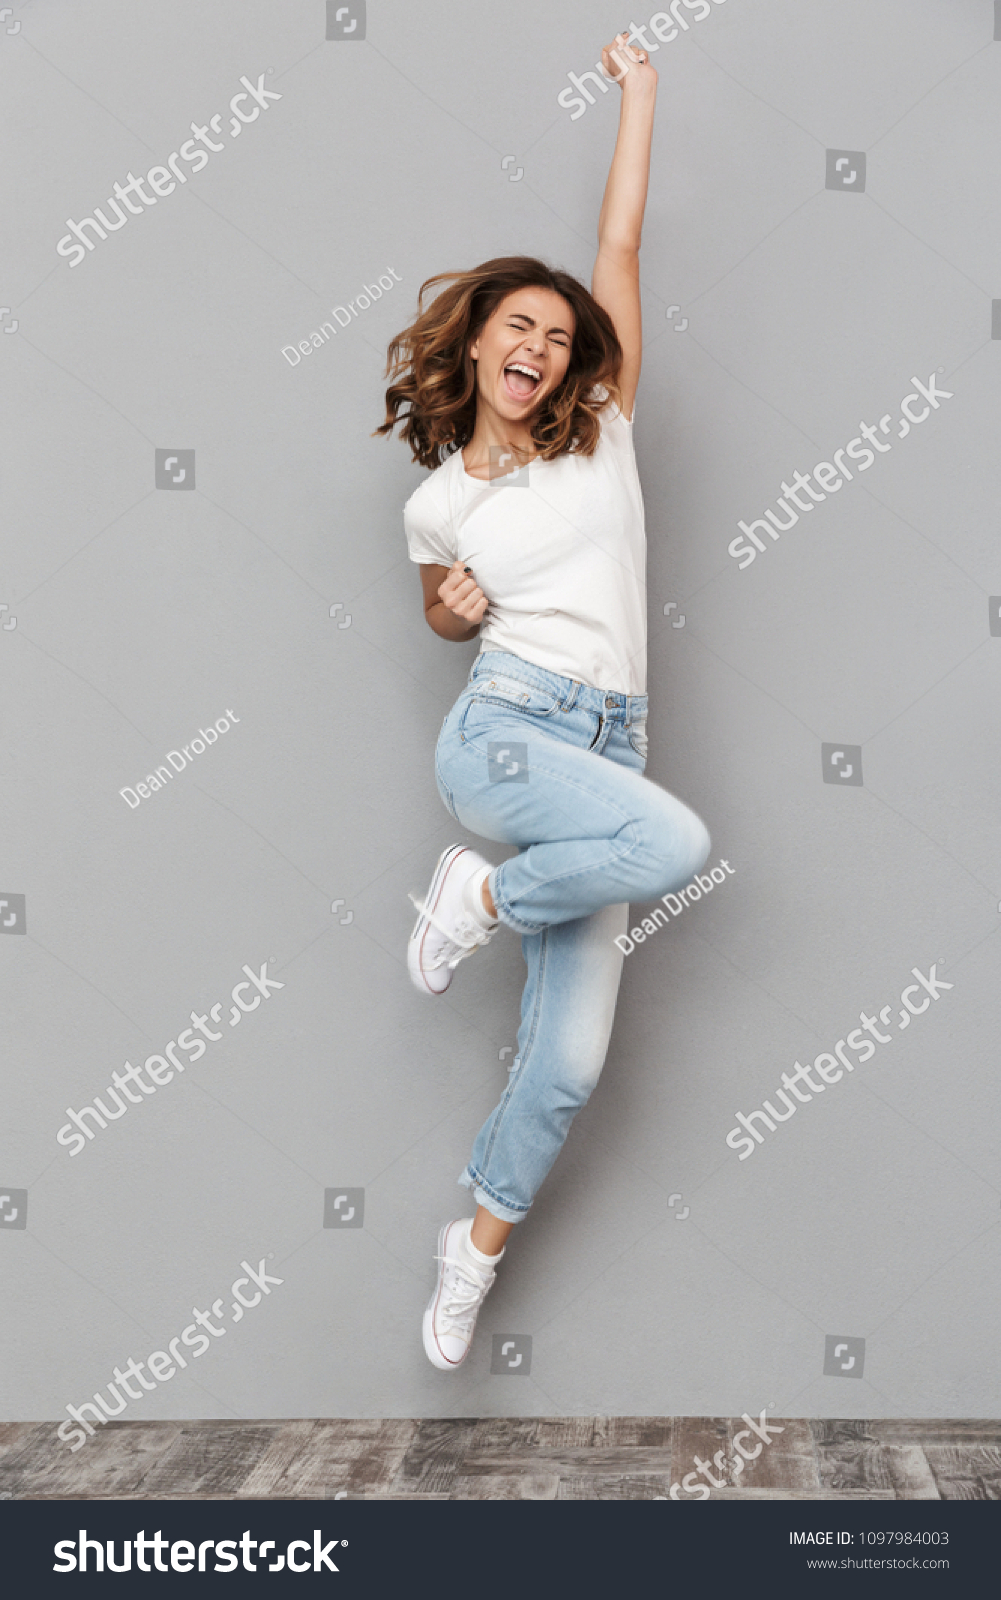 Full length portrait of a joyful young woman jumping and celebrating over gray background #1097984003